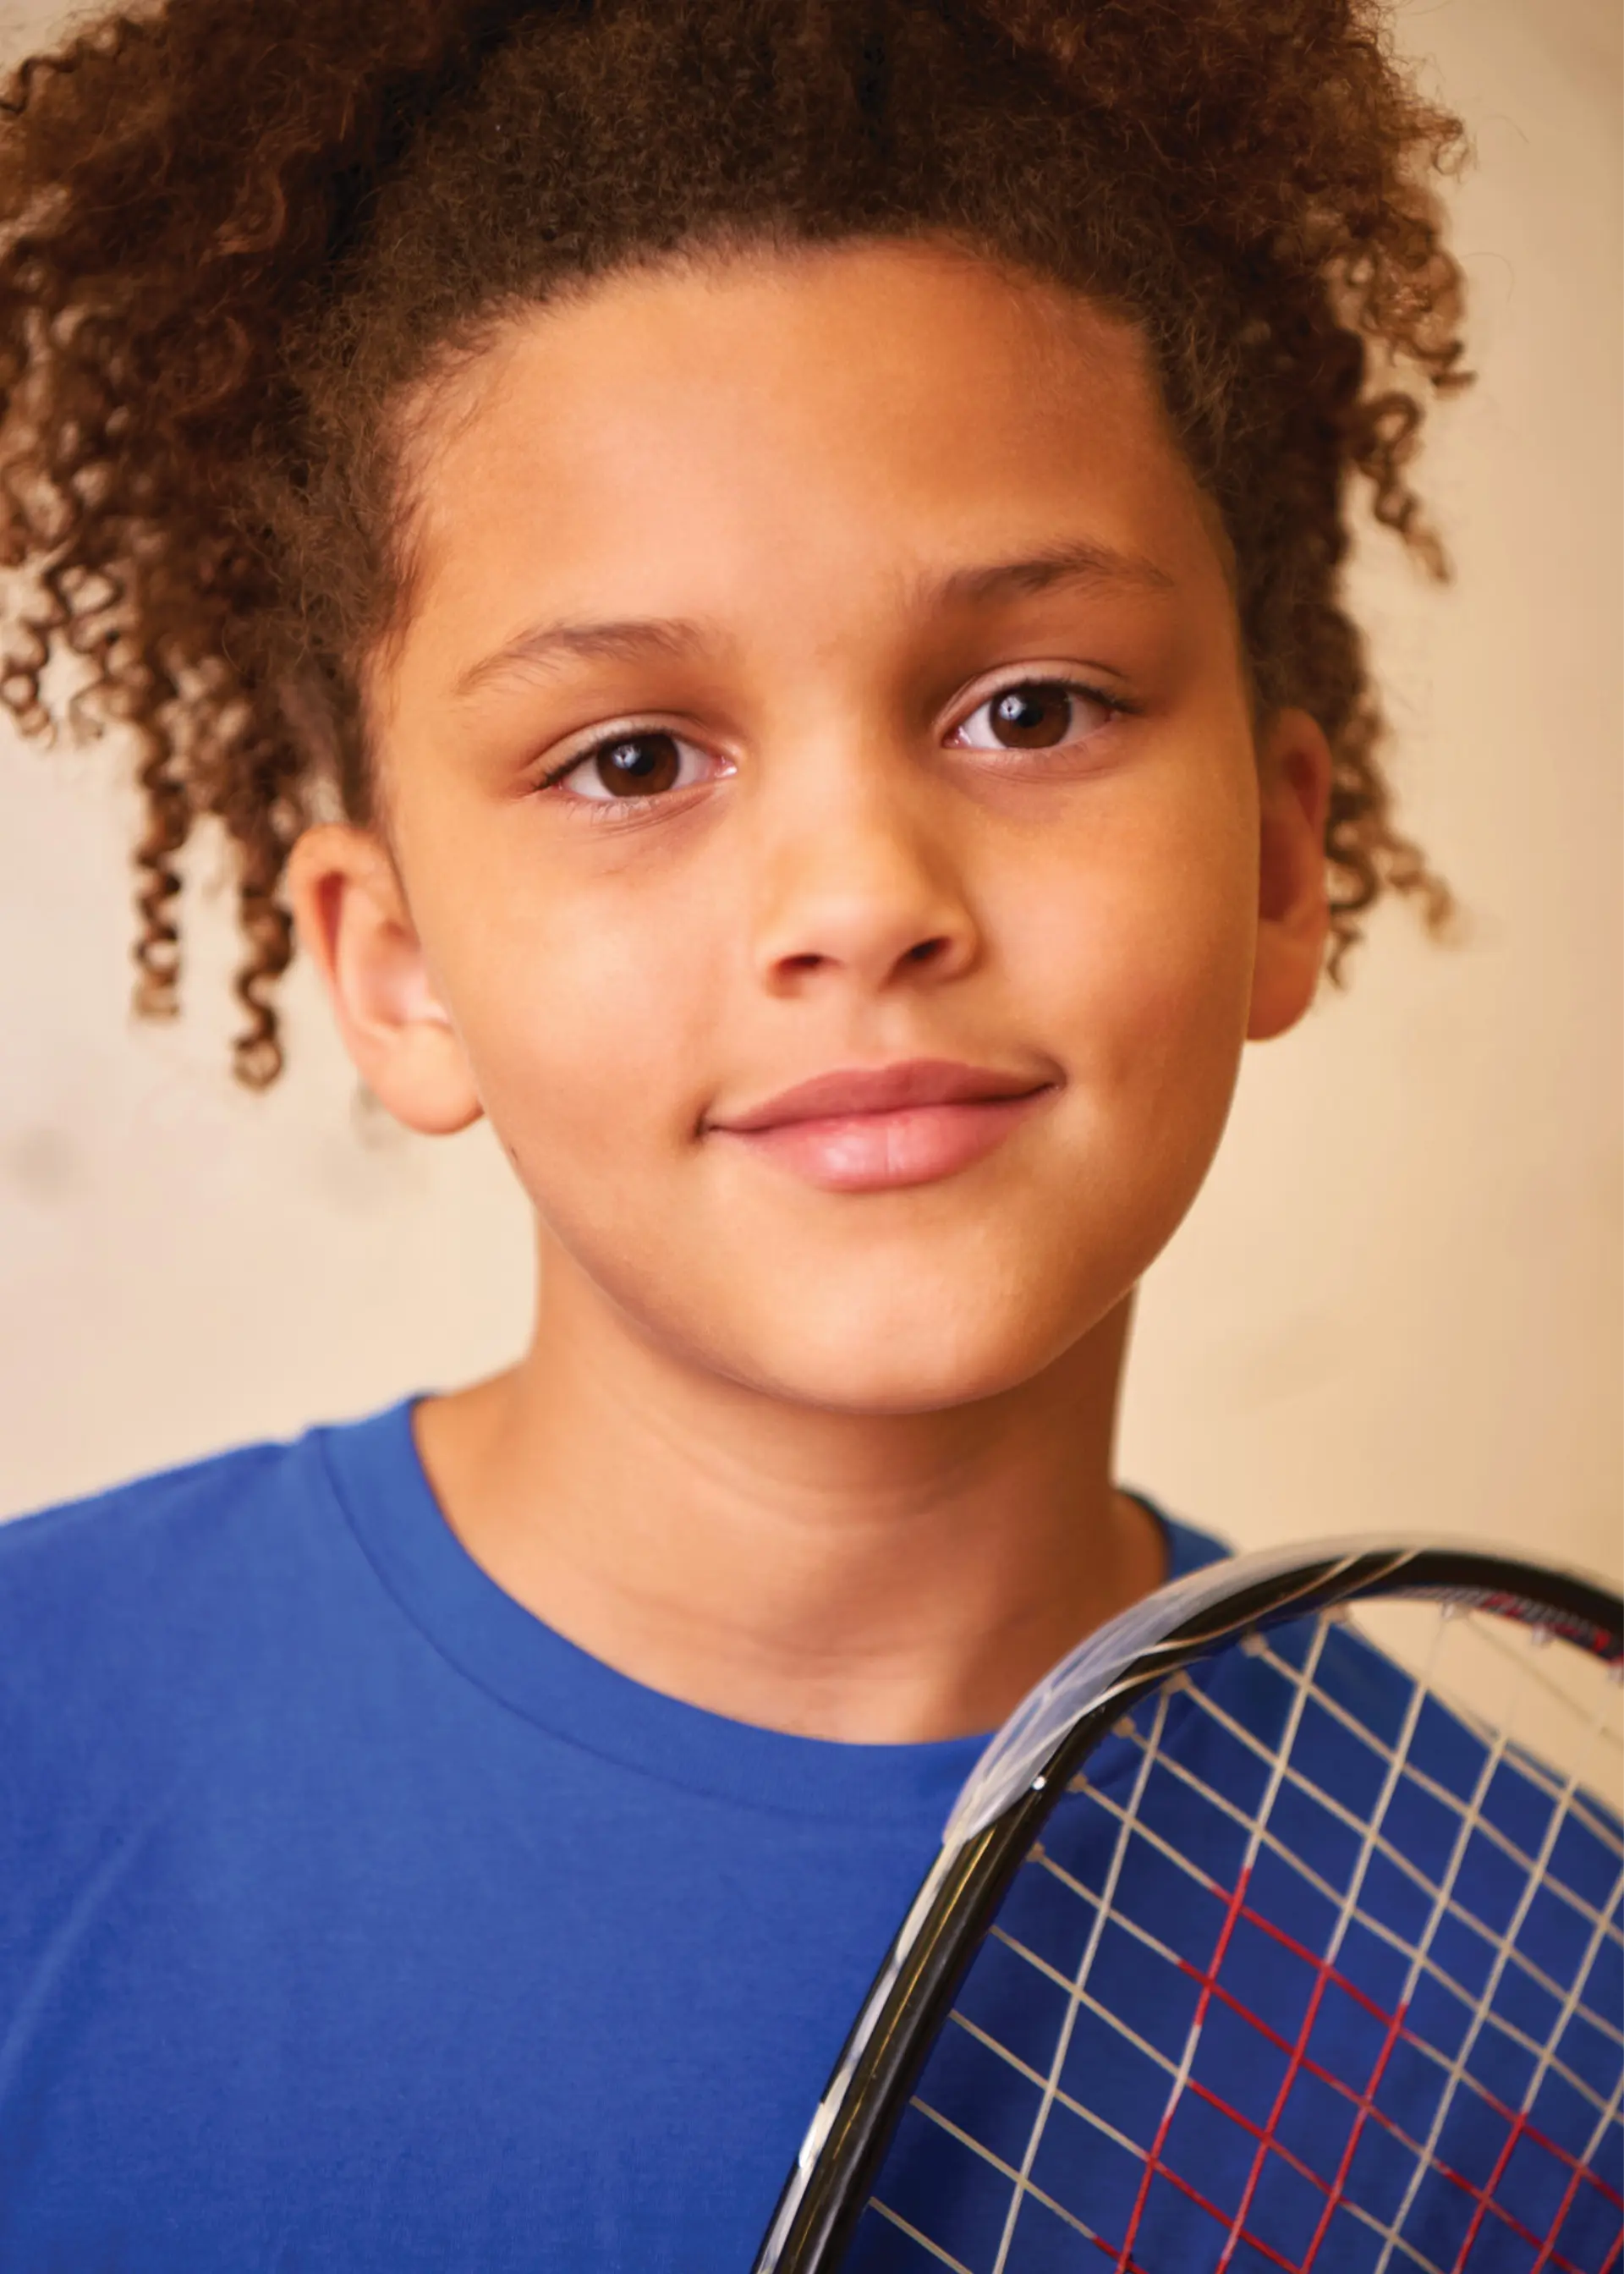 A close up of a child holding a racquet.